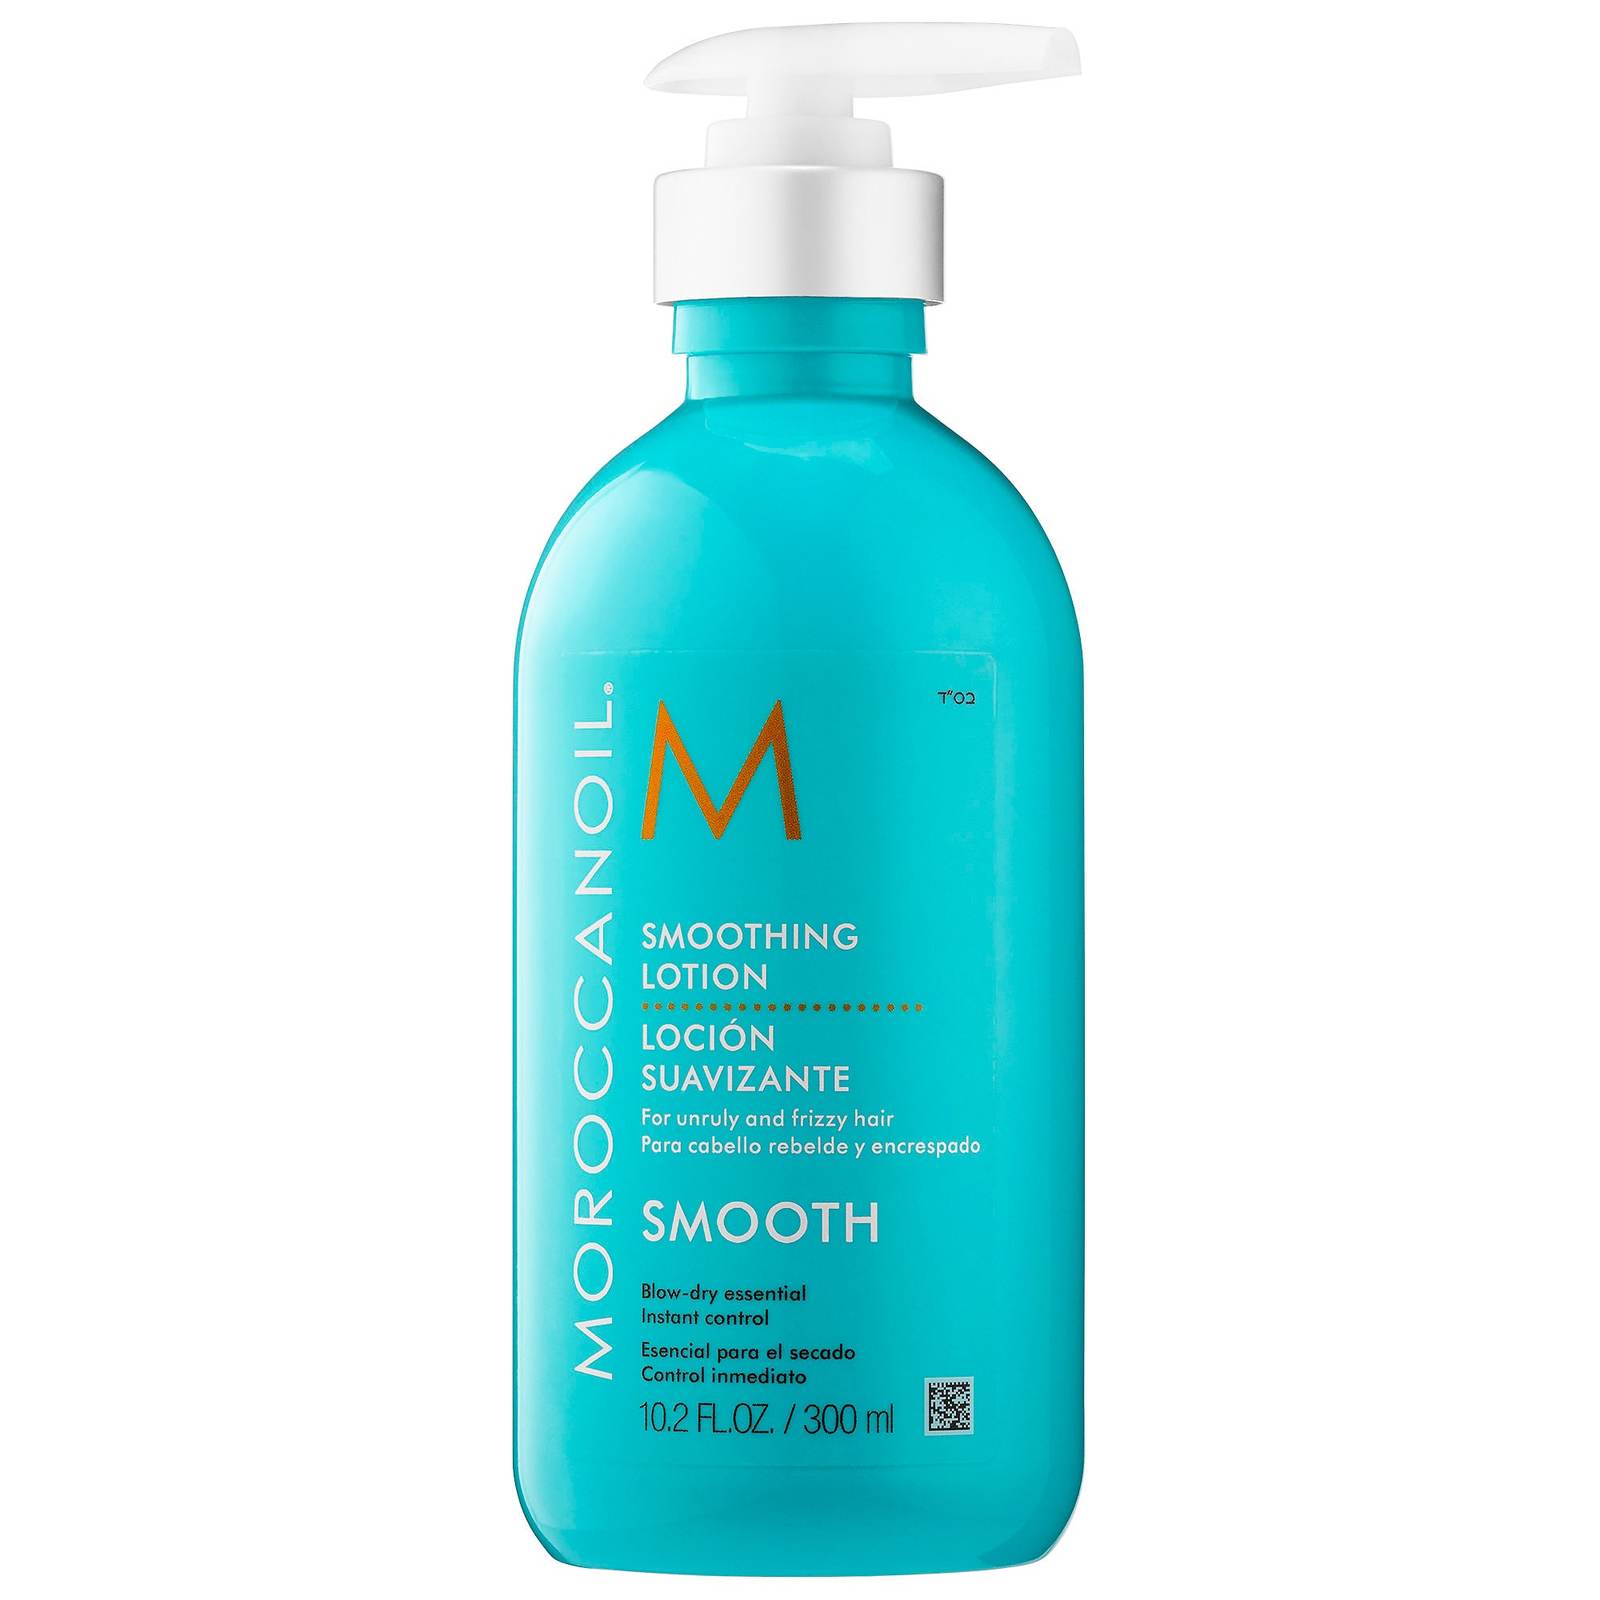 MoroccanOil Smooth Smoothing Lotion 10.2oz